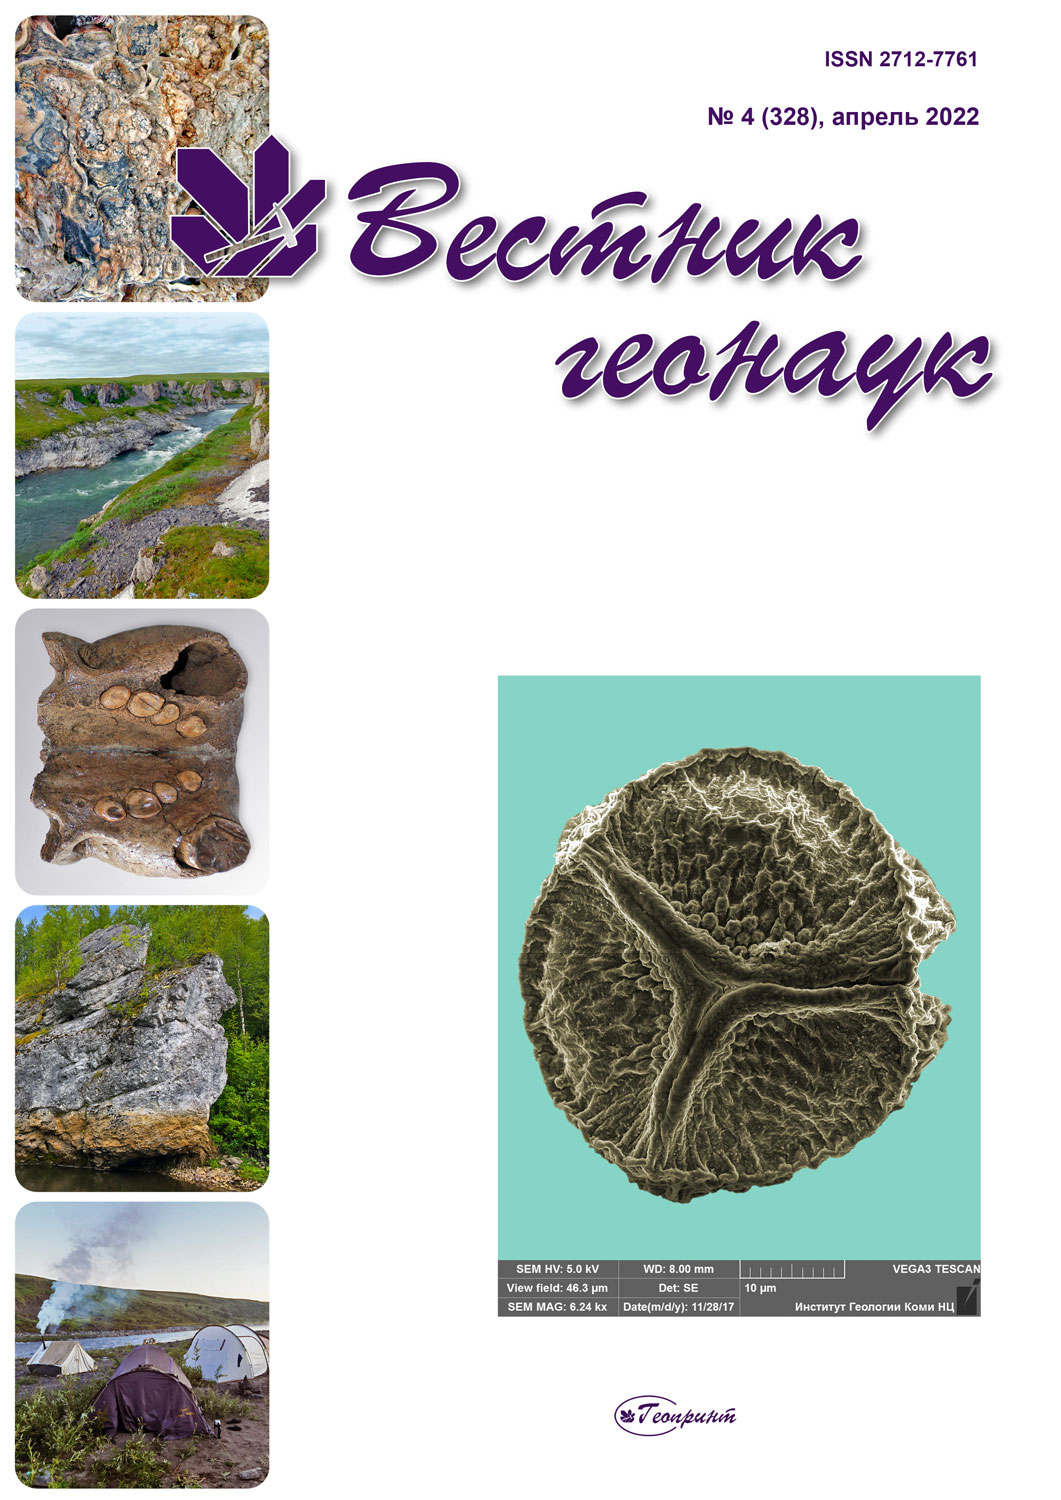                         Bone remains of mammals from the Paleolithic site Ushbulak (North-Eastern Kazakhstan): archaeological context, mineralogical and geochemical properties and paleoecological reconstructions
            